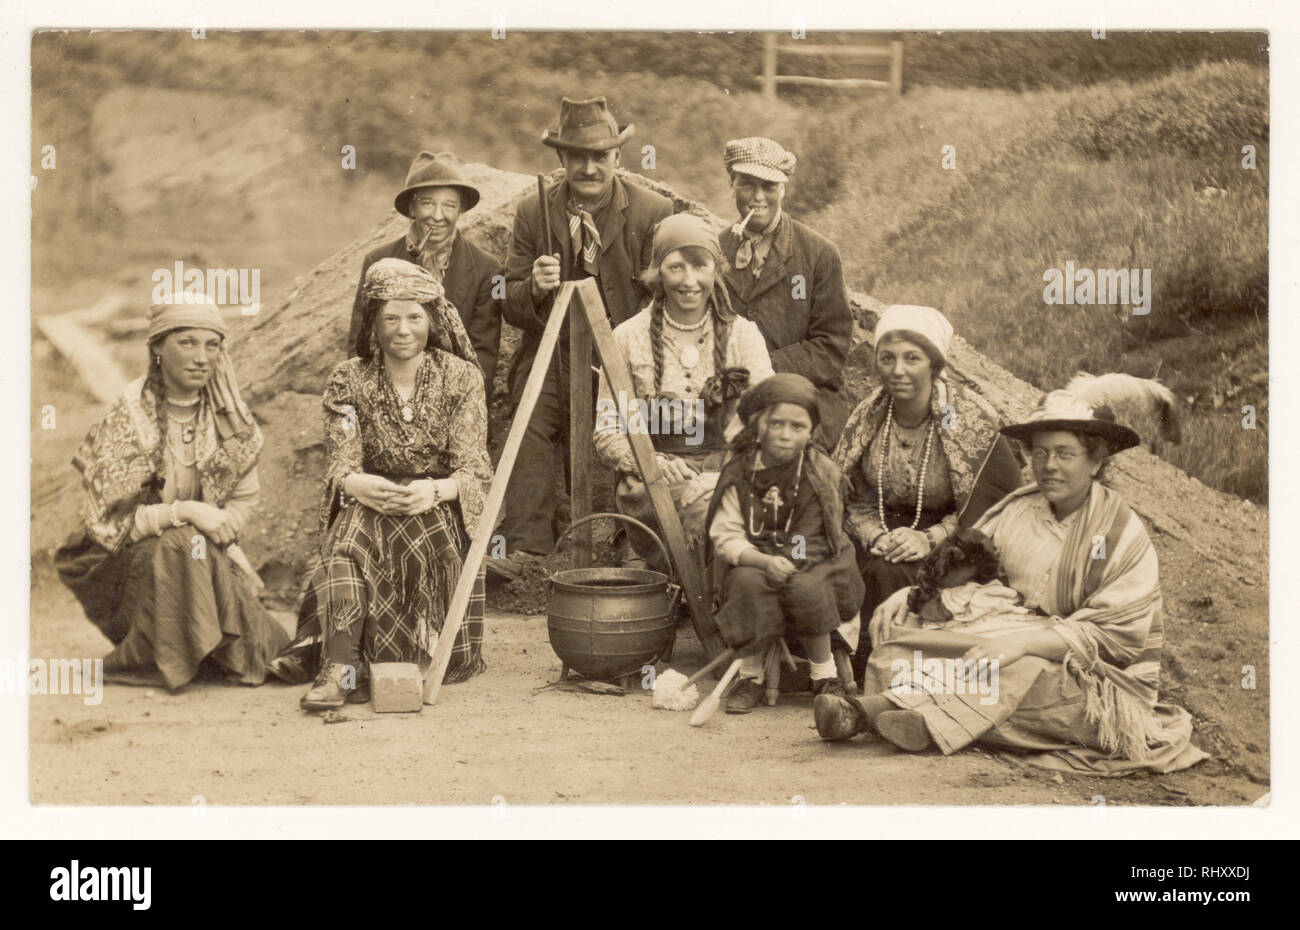 Early 1900's postcard of family dressed as gypsies in traditional dress, blackened faces, stitting next to cooking pot, posing for a group photograph,  U.K. circa 1920's Stock Photo